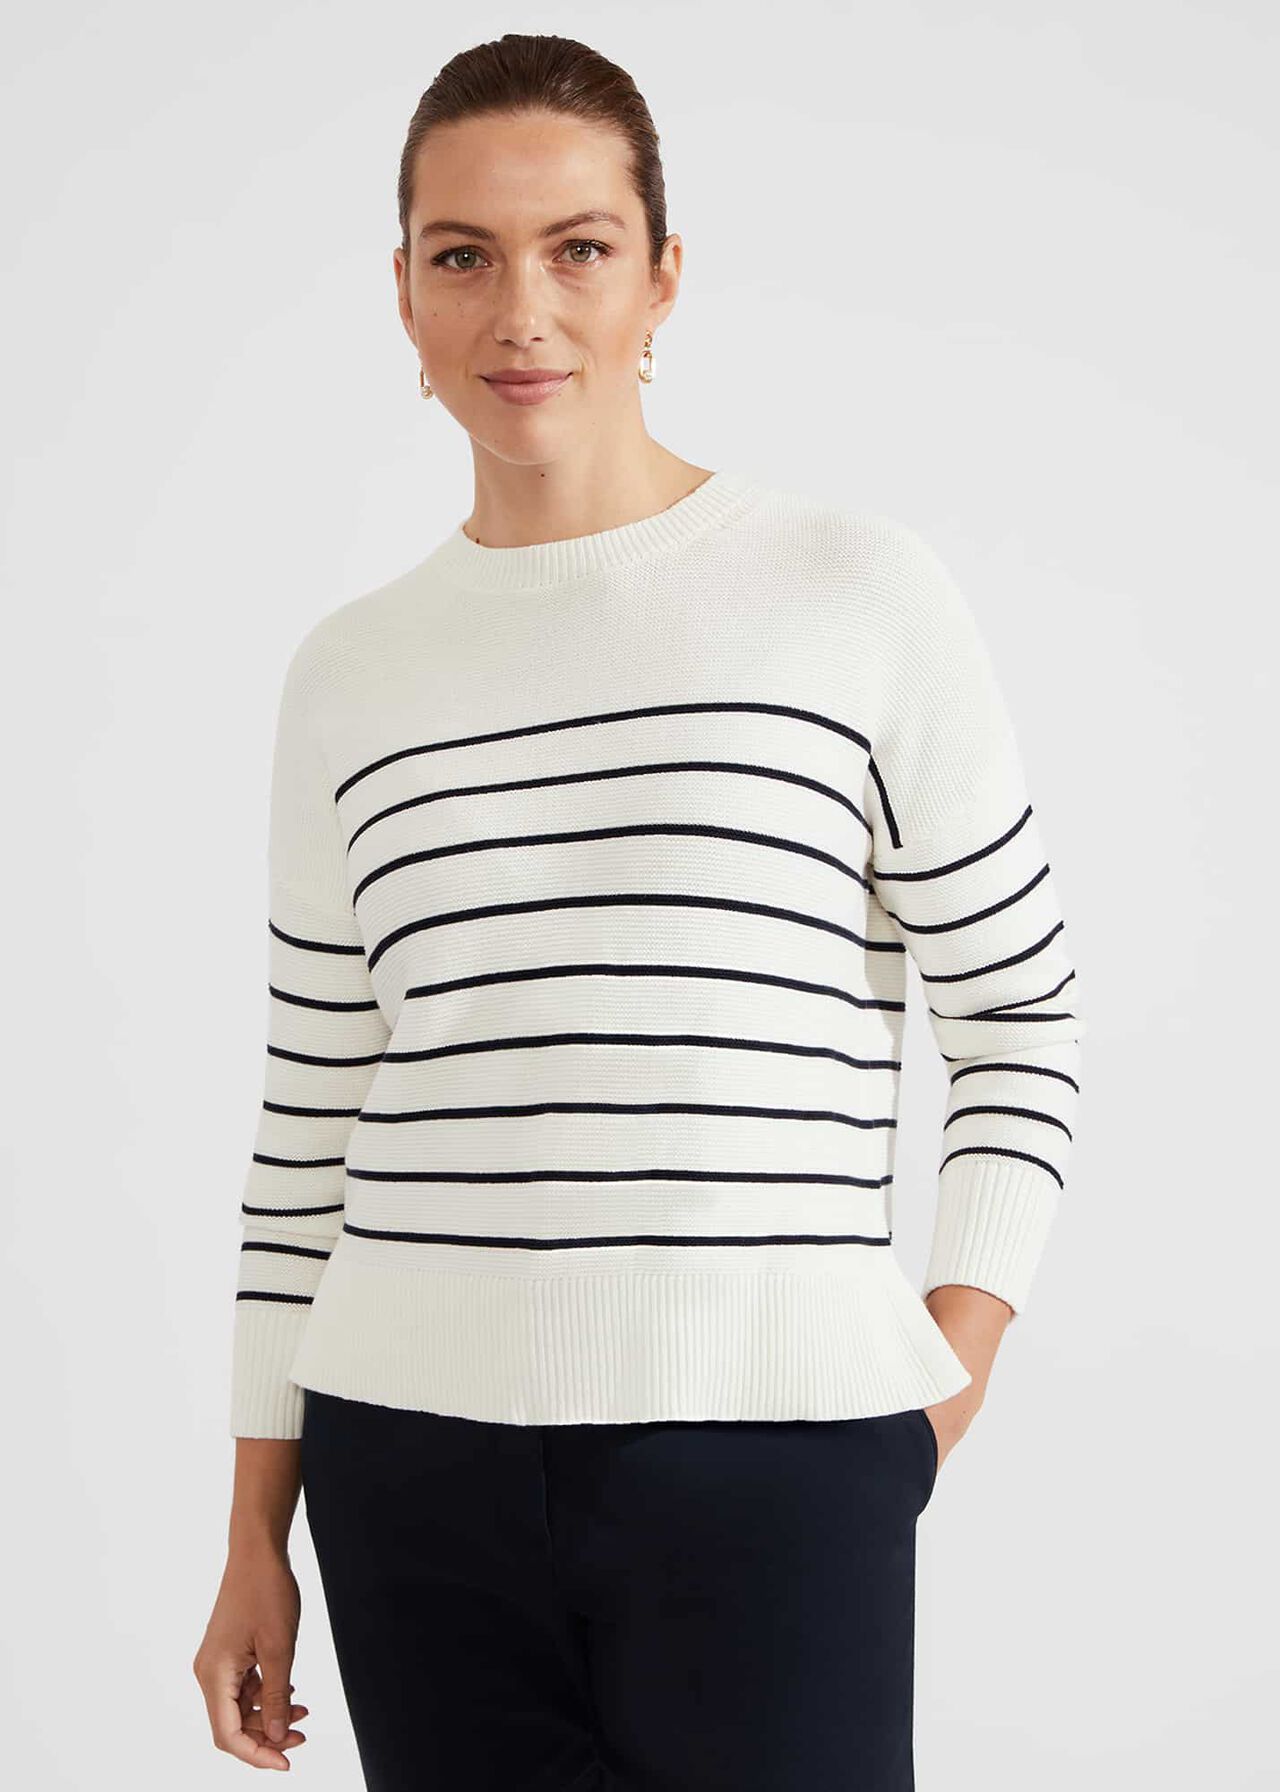 Ruby Cotton Button Sweater, Ivory Navy, hi-res